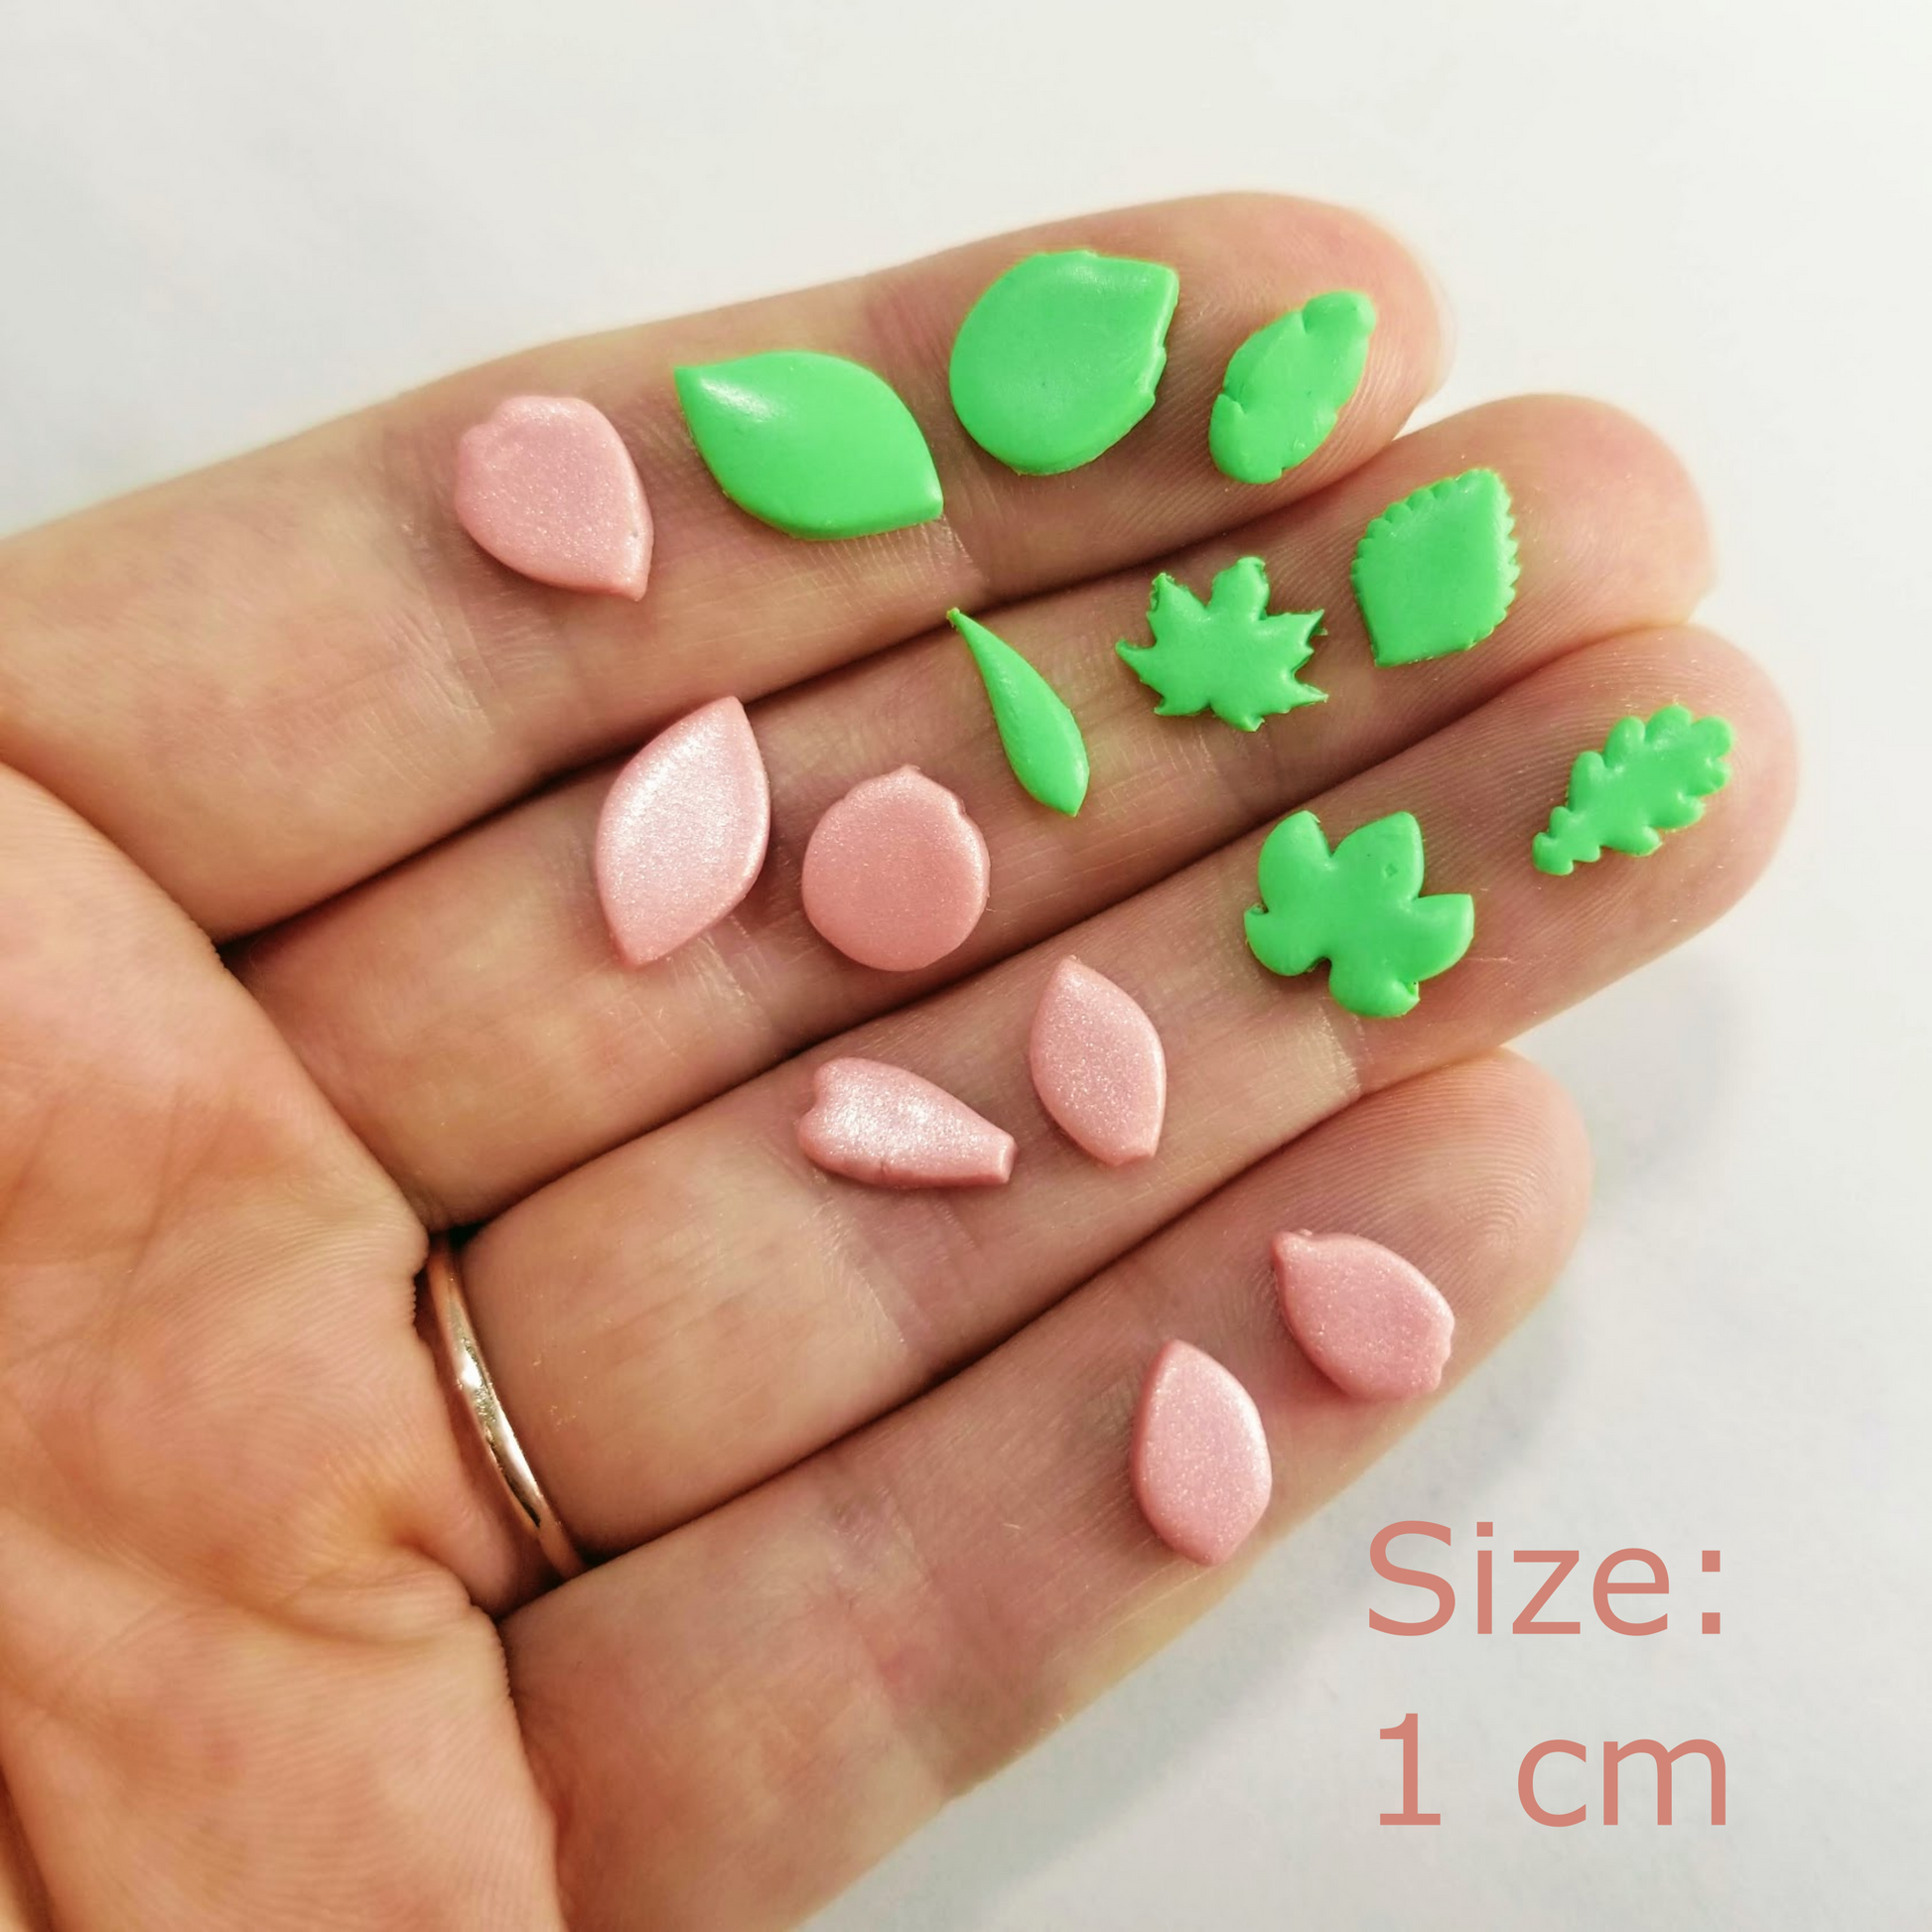 1 centimeter size Tiny leaves and flower petals set sample finish product for reference